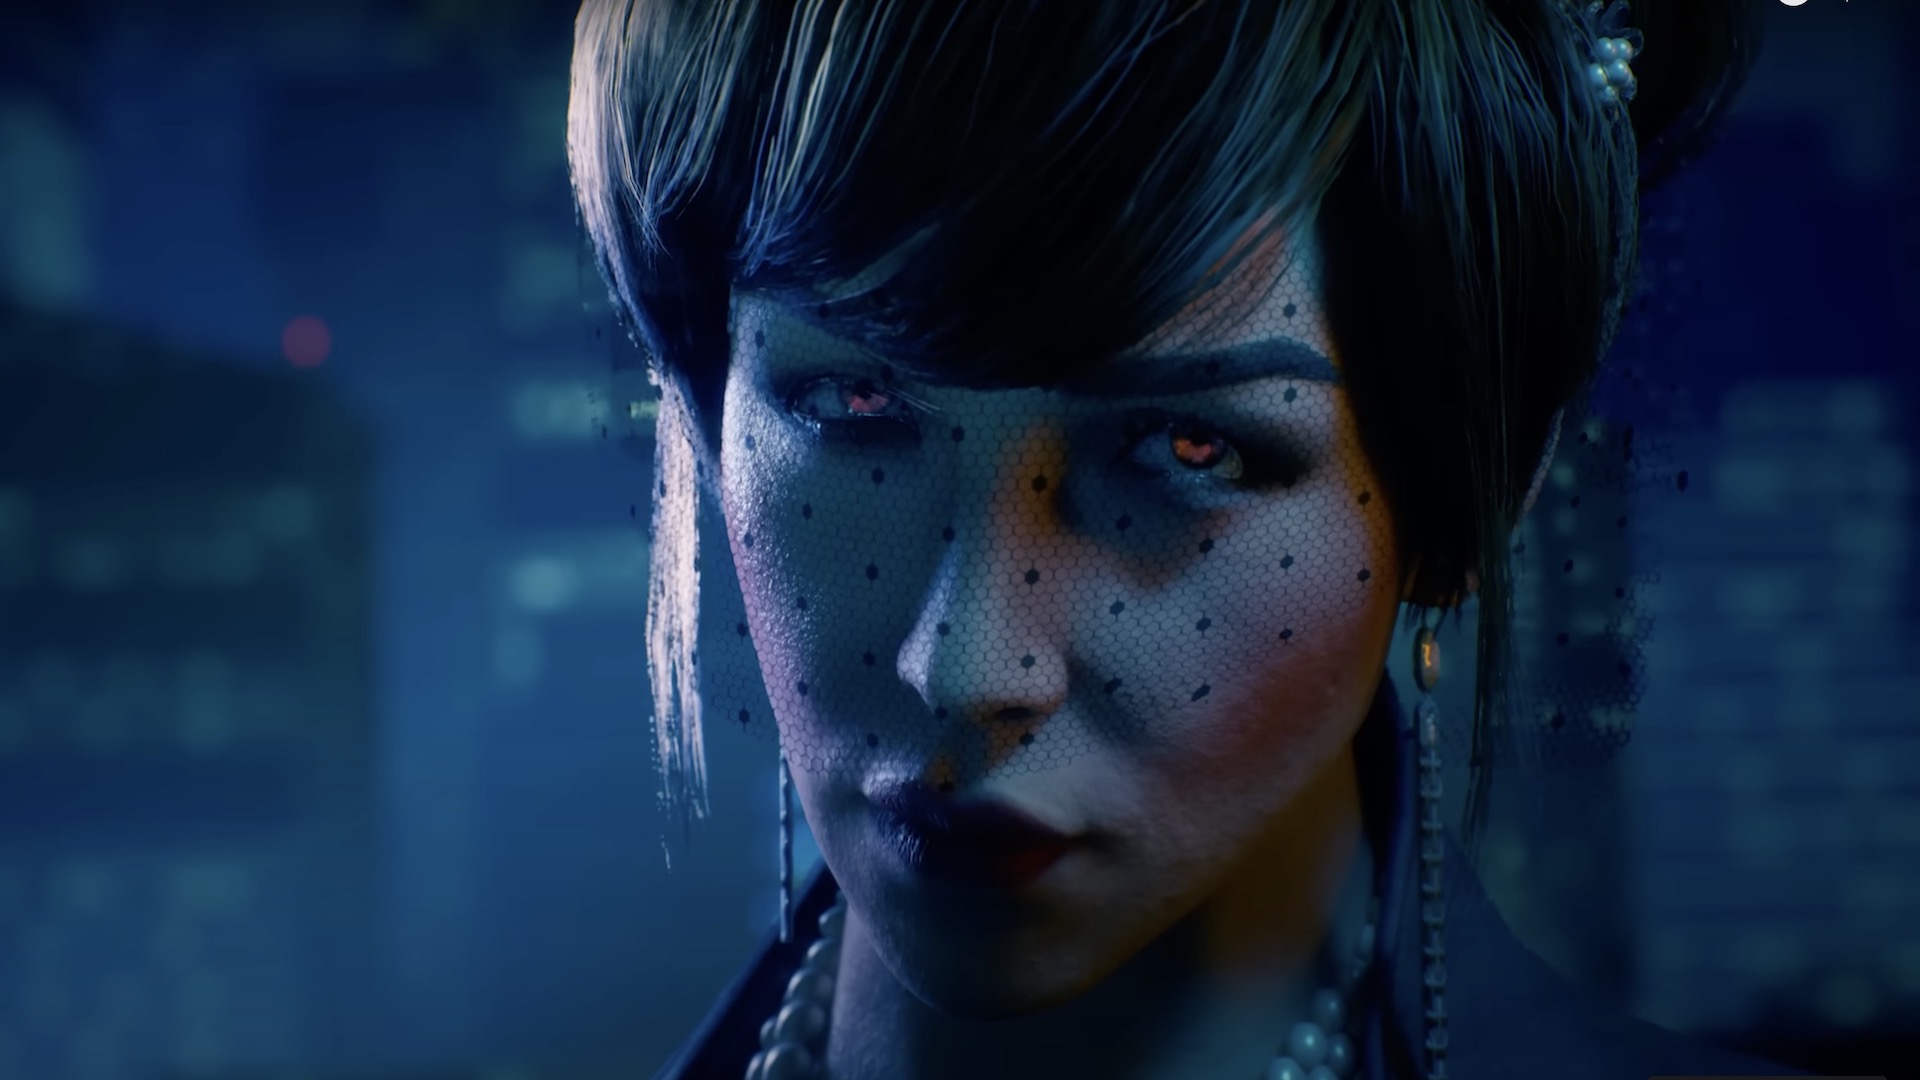 Vampire the Masquerade: Bloodlines 2 – Everything we know so far